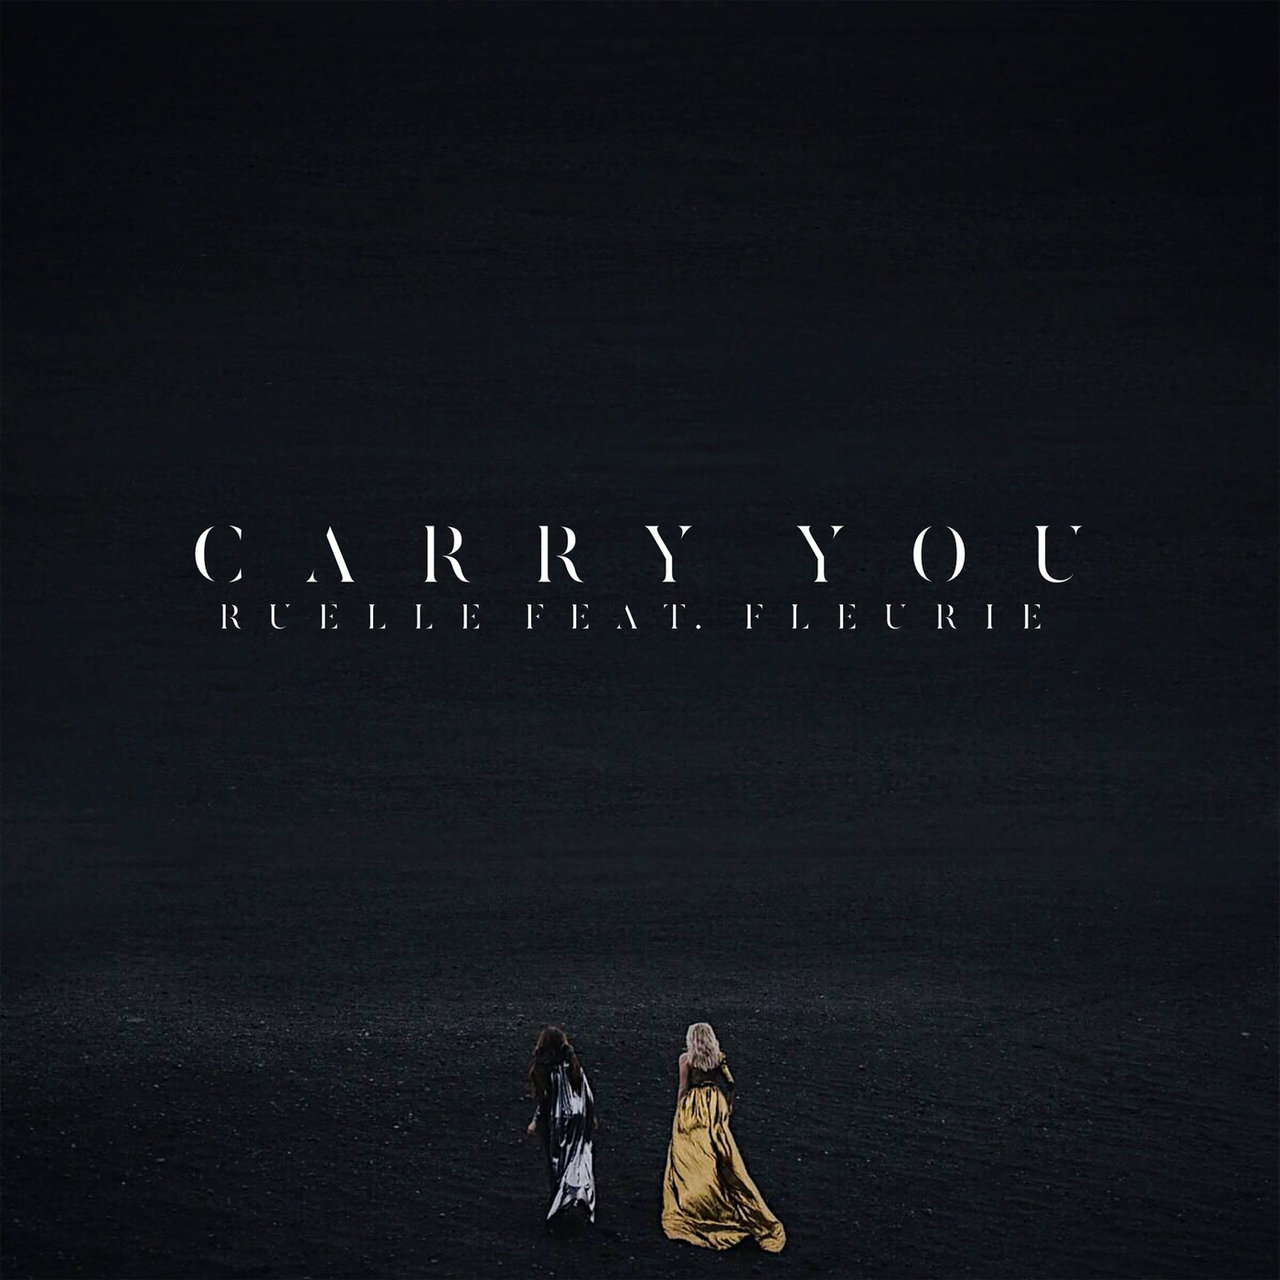 Ruelle featuring Fleurie — Carry You cover artwork